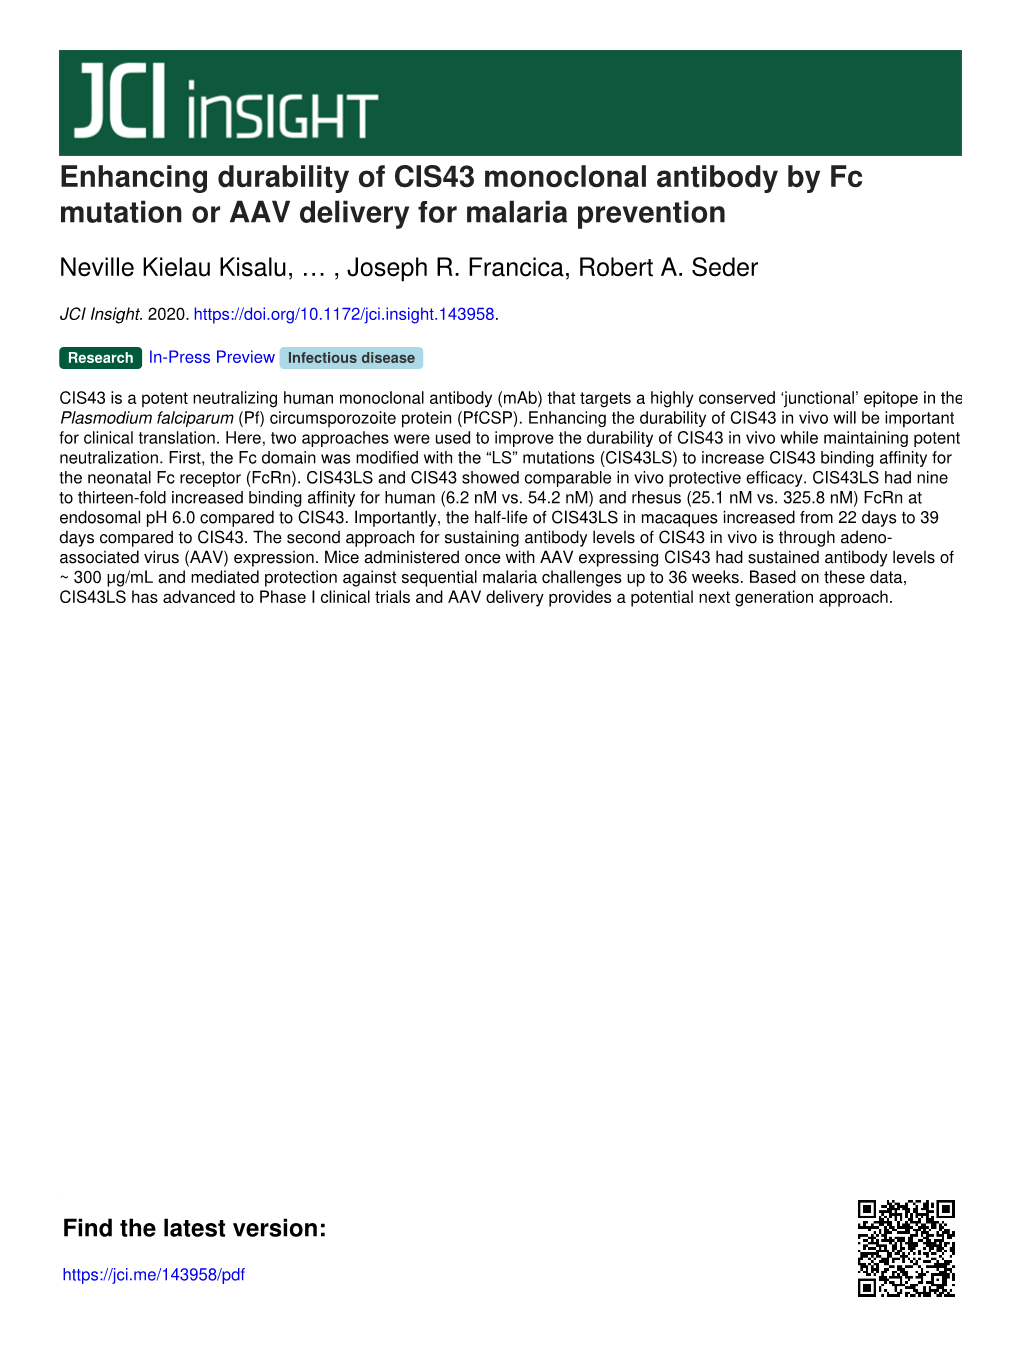 Enhancing Durability of CIS43 Monoclonal Antibody by Fc Mutation Or AAV Delivery for Malaria Prevention